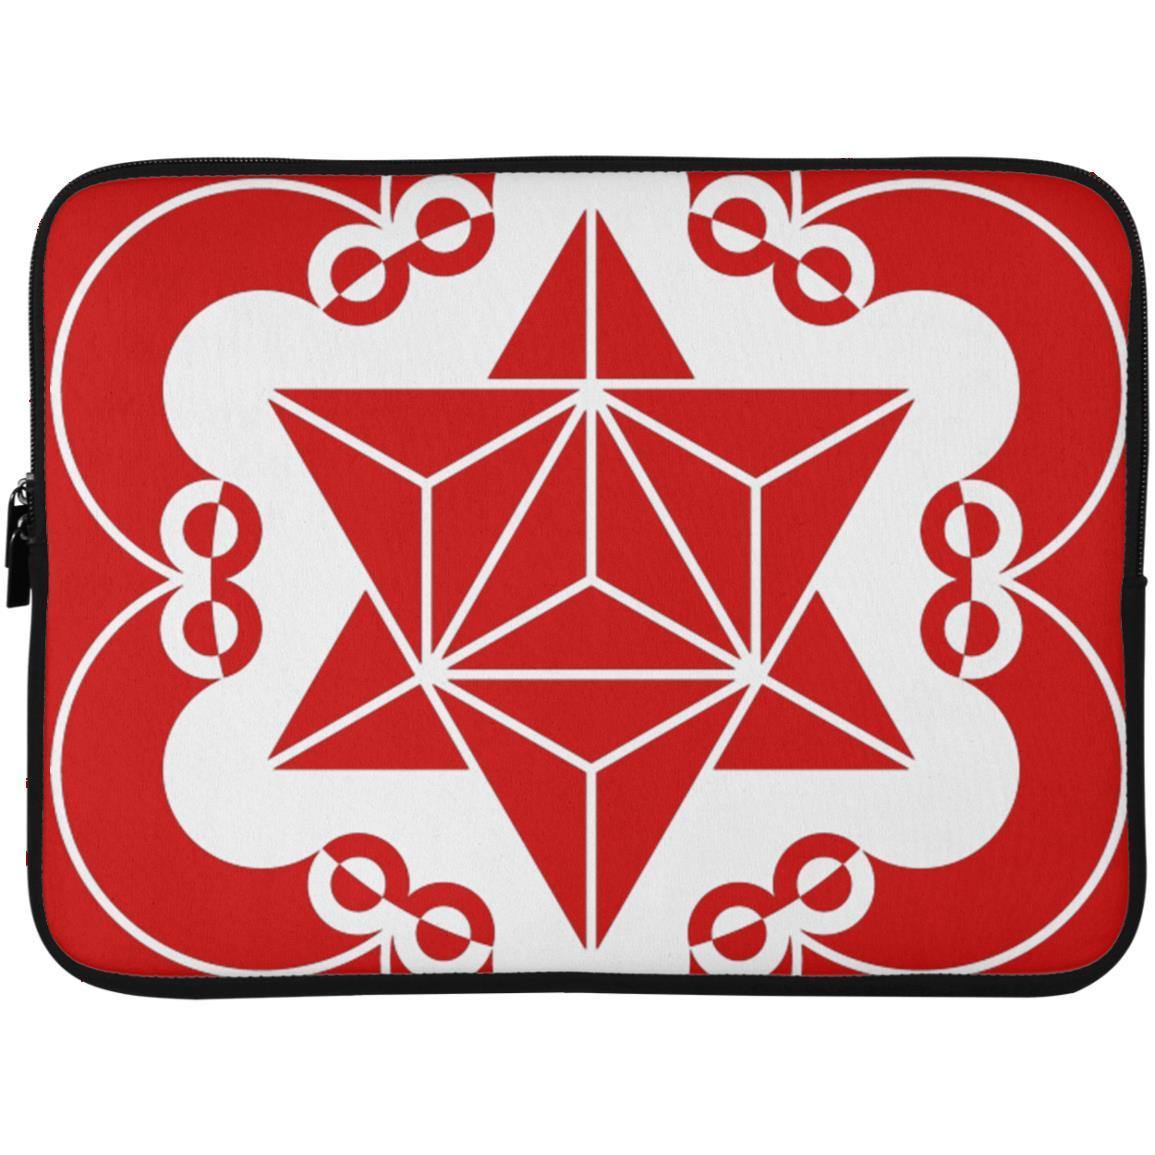 Crop Circle Laptop Sleeve - Cley Hill 2 - Shapes of Wisdom